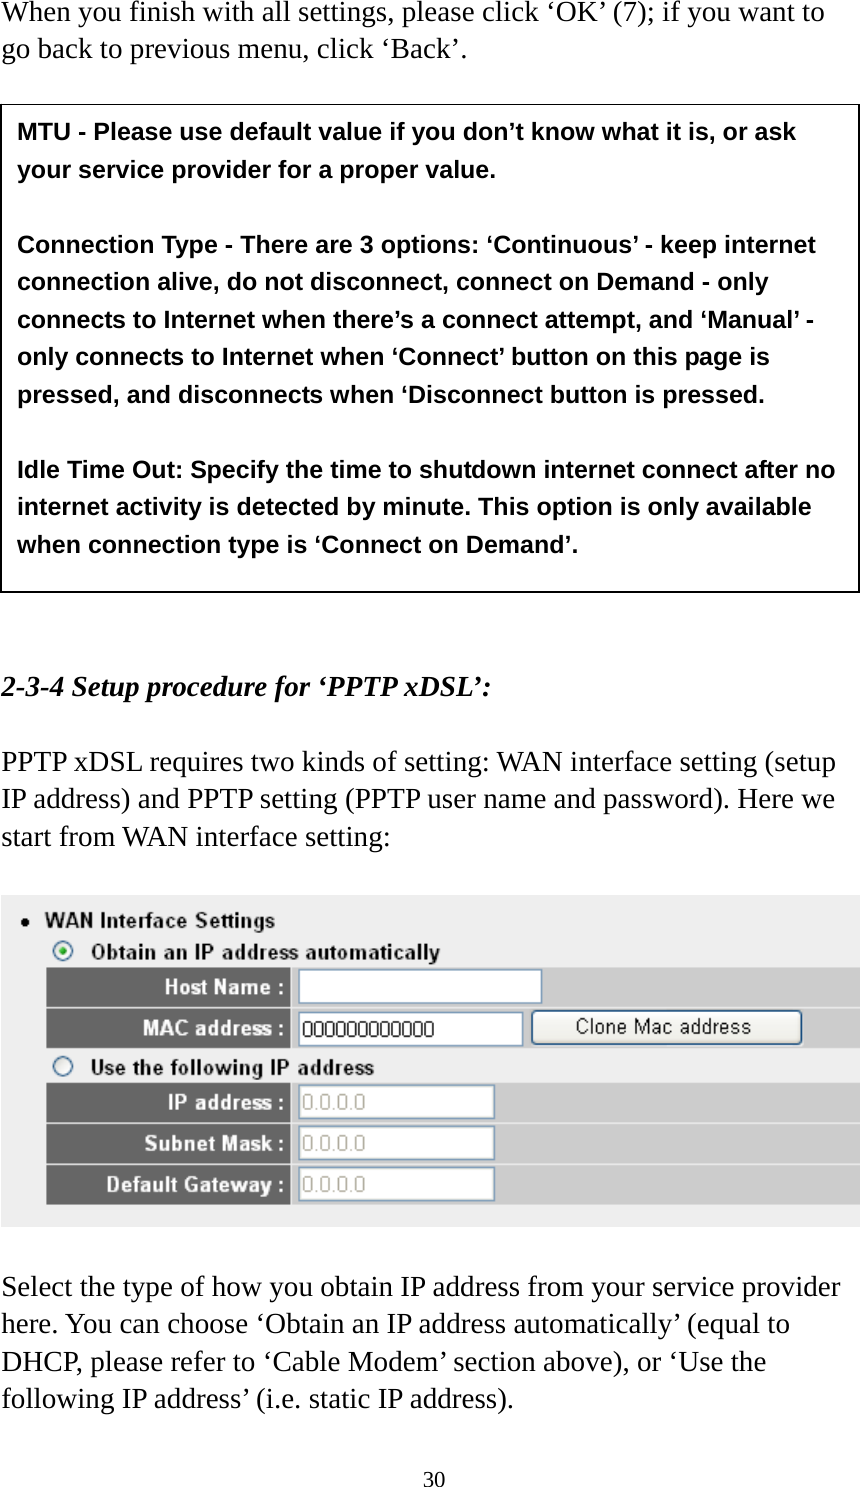 30 When you finish with all settings, please click ‘OK’ (7); if you want to go back to previous menu, click ‘Back’.                  2-3-4 Setup procedure for ‘PPTP xDSL’:  PPTP xDSL requires two kinds of setting: WAN interface setting (setup IP address) and PPTP setting (PPTP user name and password). Here we start from WAN interface setting:    Select the type of how you obtain IP address from your service provider here. You can choose ‘Obtain an IP address automatically’ (equal to DHCP, please refer to ‘Cable Modem’ section above), or ‘Use the following IP address’ (i.e. static IP address).   MTU - Please use default value if you don’t know what it is, or ask your service provider for a proper value.  Connection Type - There are 3 options: ‘Continuous’ - keep internet connection alive, do not disconnect, connect on Demand - only connects to Internet when there’s a connect attempt, and ‘Manual’ - only connects to Internet when ‘Connect’ button on this page is pressed, and disconnects when ‘Disconnect button is pressed.  Idle Time Out: Specify the time to shutdown internet connect after no internet activity is detected by minute. This option is only available when connection type is ‘Connect on Demand’. 